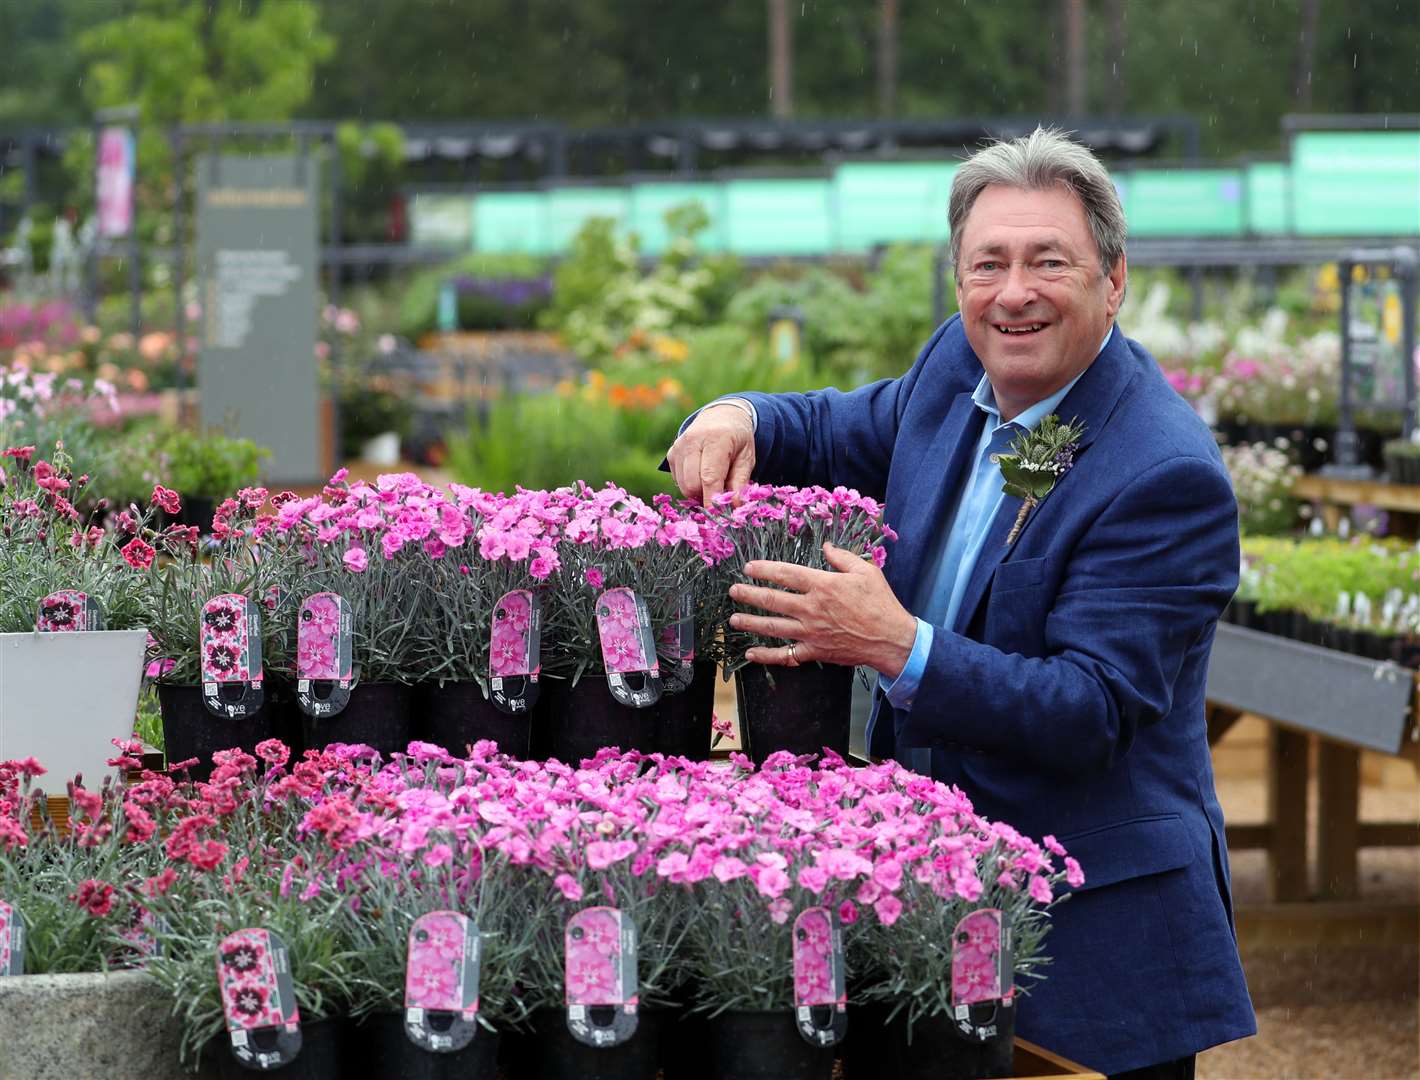 TV gardener Alan Titchmarsh was part of a campaign to provide additional aid for the struggling horticulture sector (Steve Parsons/PA)